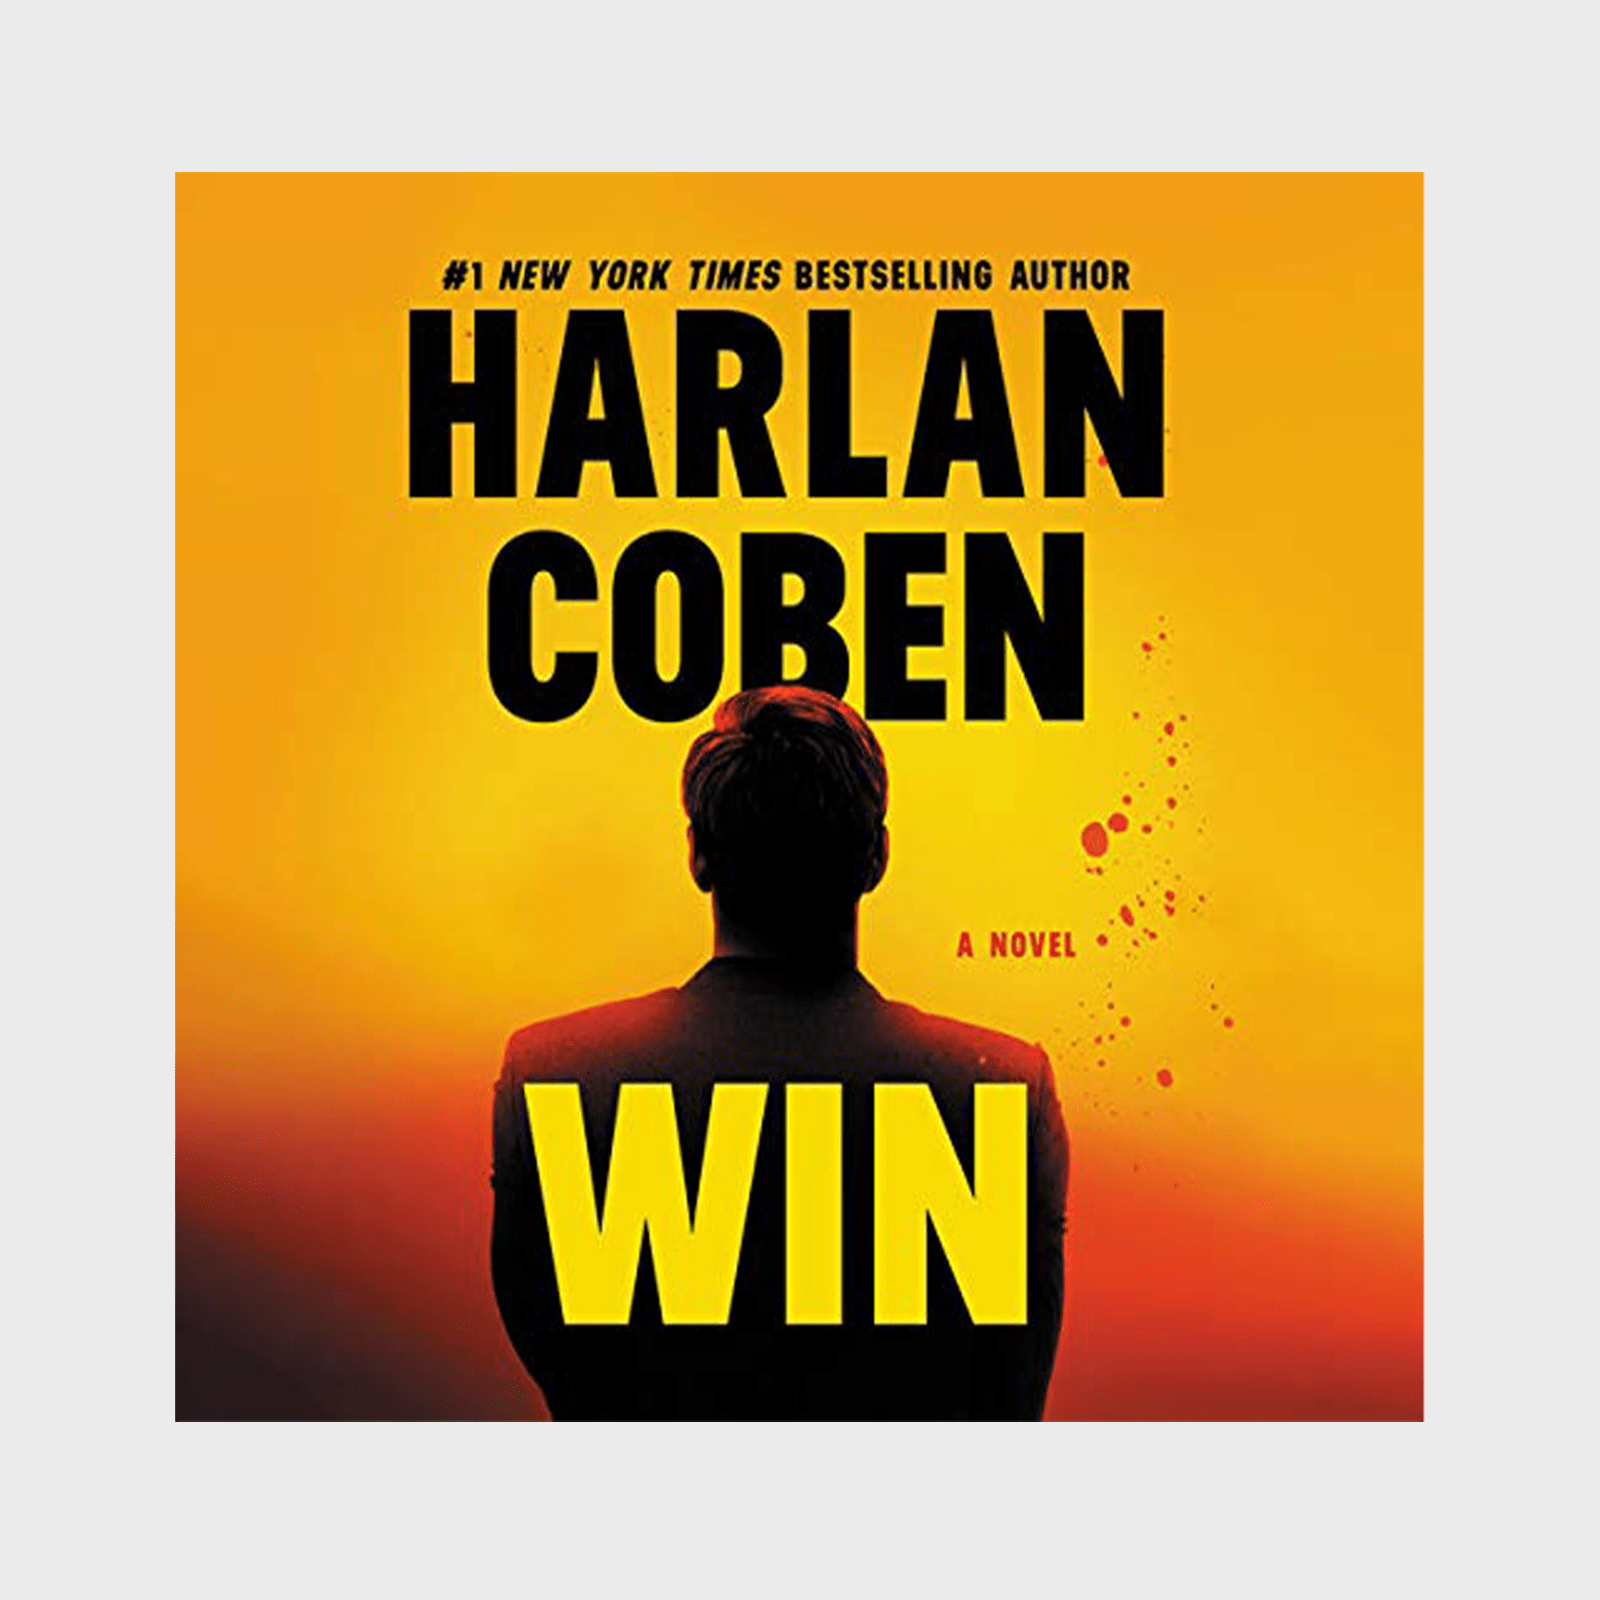 <h3 class=""><strong><em>Win</em> by Harlan Coben</strong></h3> <p>Fans of the Myron Bolitar series who already love the morally gray sidekick Windsor Horne Lockwood III are ecstatic that master of <a href="https://www.rd.com/list/best-thriller-books/" rel="noopener noreferrer">thriller books</a> Harlan Coben has finally given <a href="https://www.amazon.com/Win/dp/B08L9K245G/" rel="noopener noreferrer"><em>Win</em></a> his own set of spin-off novels. In this series starter, Win's suitcase and a long-lost stolen painting belonging to his family are discovered in the penthouse apartment of a murder victim. Win has no idea how they ended up there, but his personal connection to the case leads him to take up his own investigation using his own fortune and unique ideas of justice. The audiobook is read by actor and frequent Coben narrator Steven Weber.</p> <p class="listicle-page__cta-button-shop"><a class="shop-btn" href="https://www.amazon.com/Win/dp/B08L9K245G/">Shop Now</a></p>